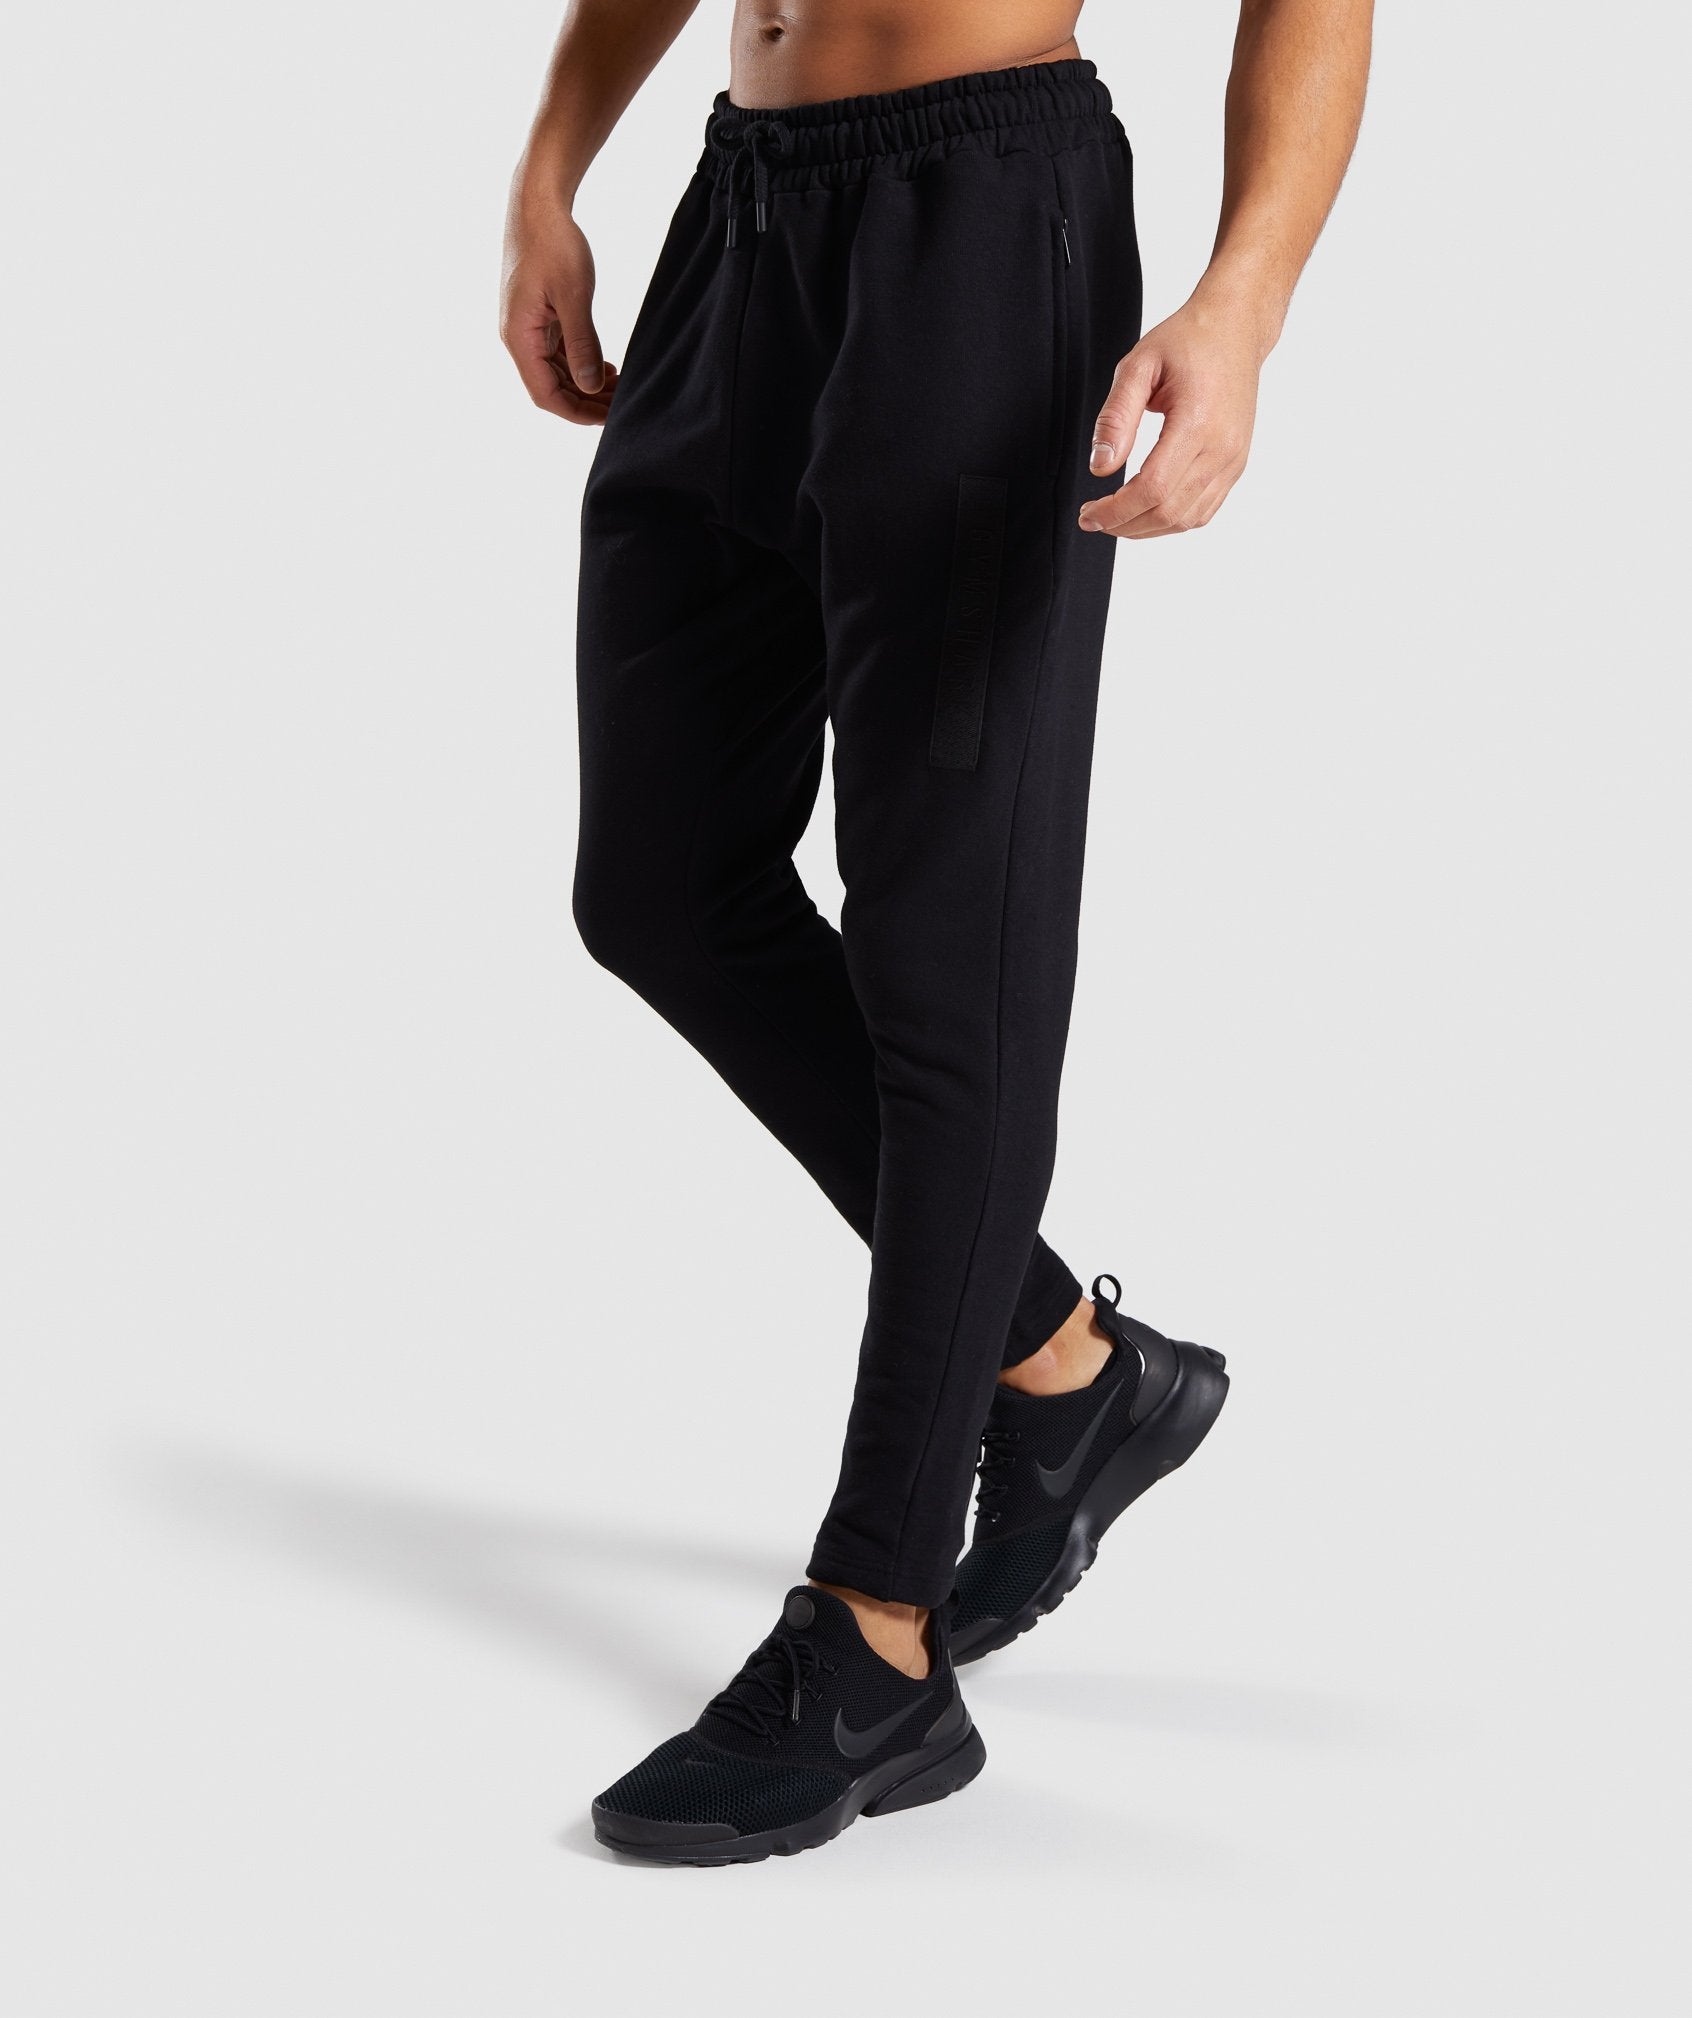 Crucial Jogger in Black - view 1